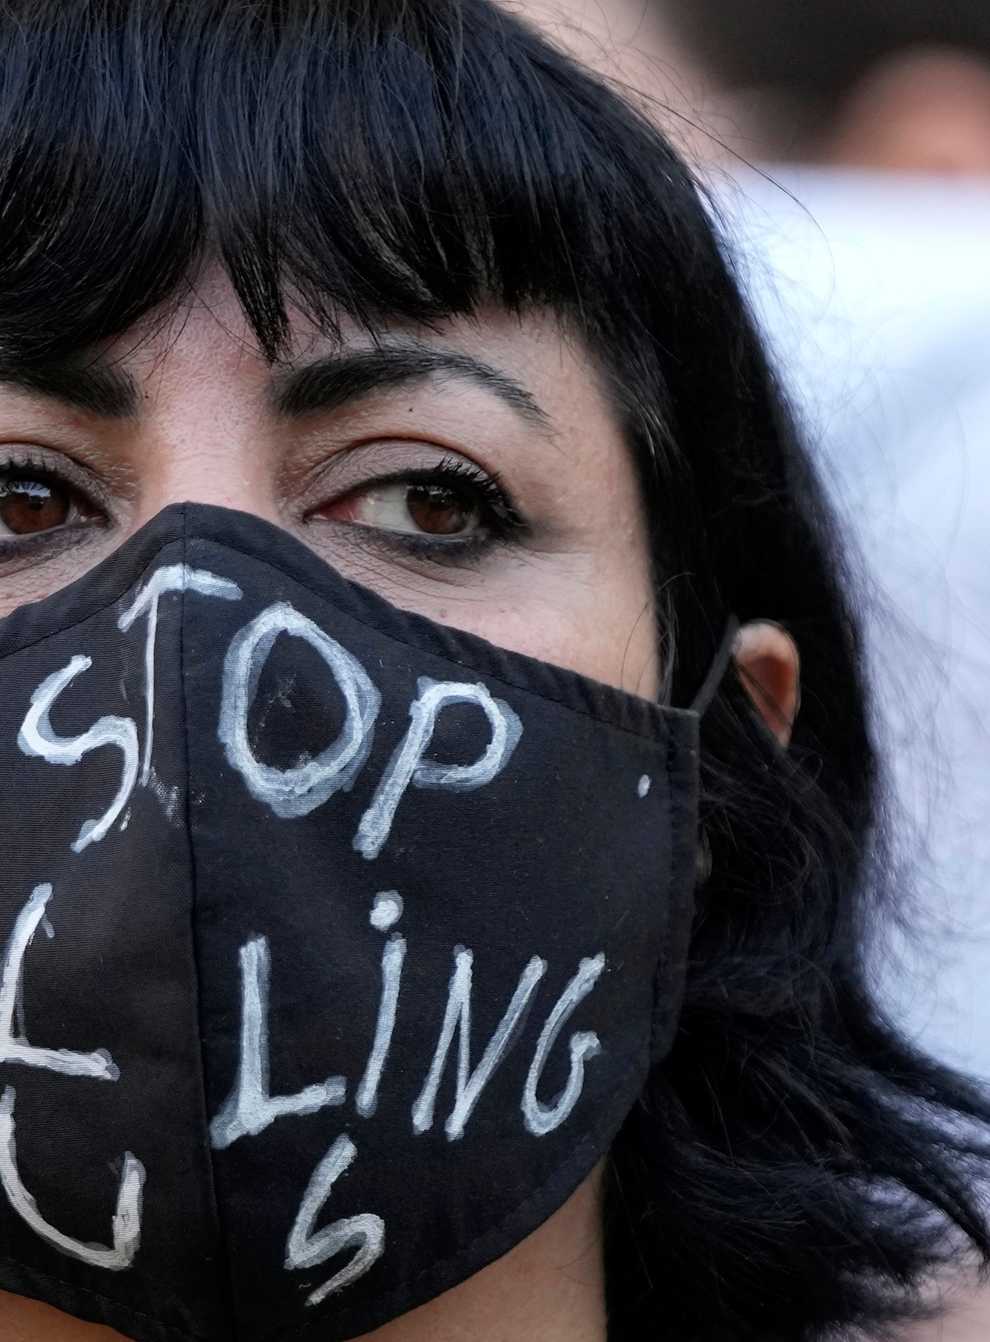 An activist wears a message on her protective face mask “Stop Killing Us” during a protest against the death of Iranian Mahsa Amini in Iran, in Beirut, Lebanon (AP)